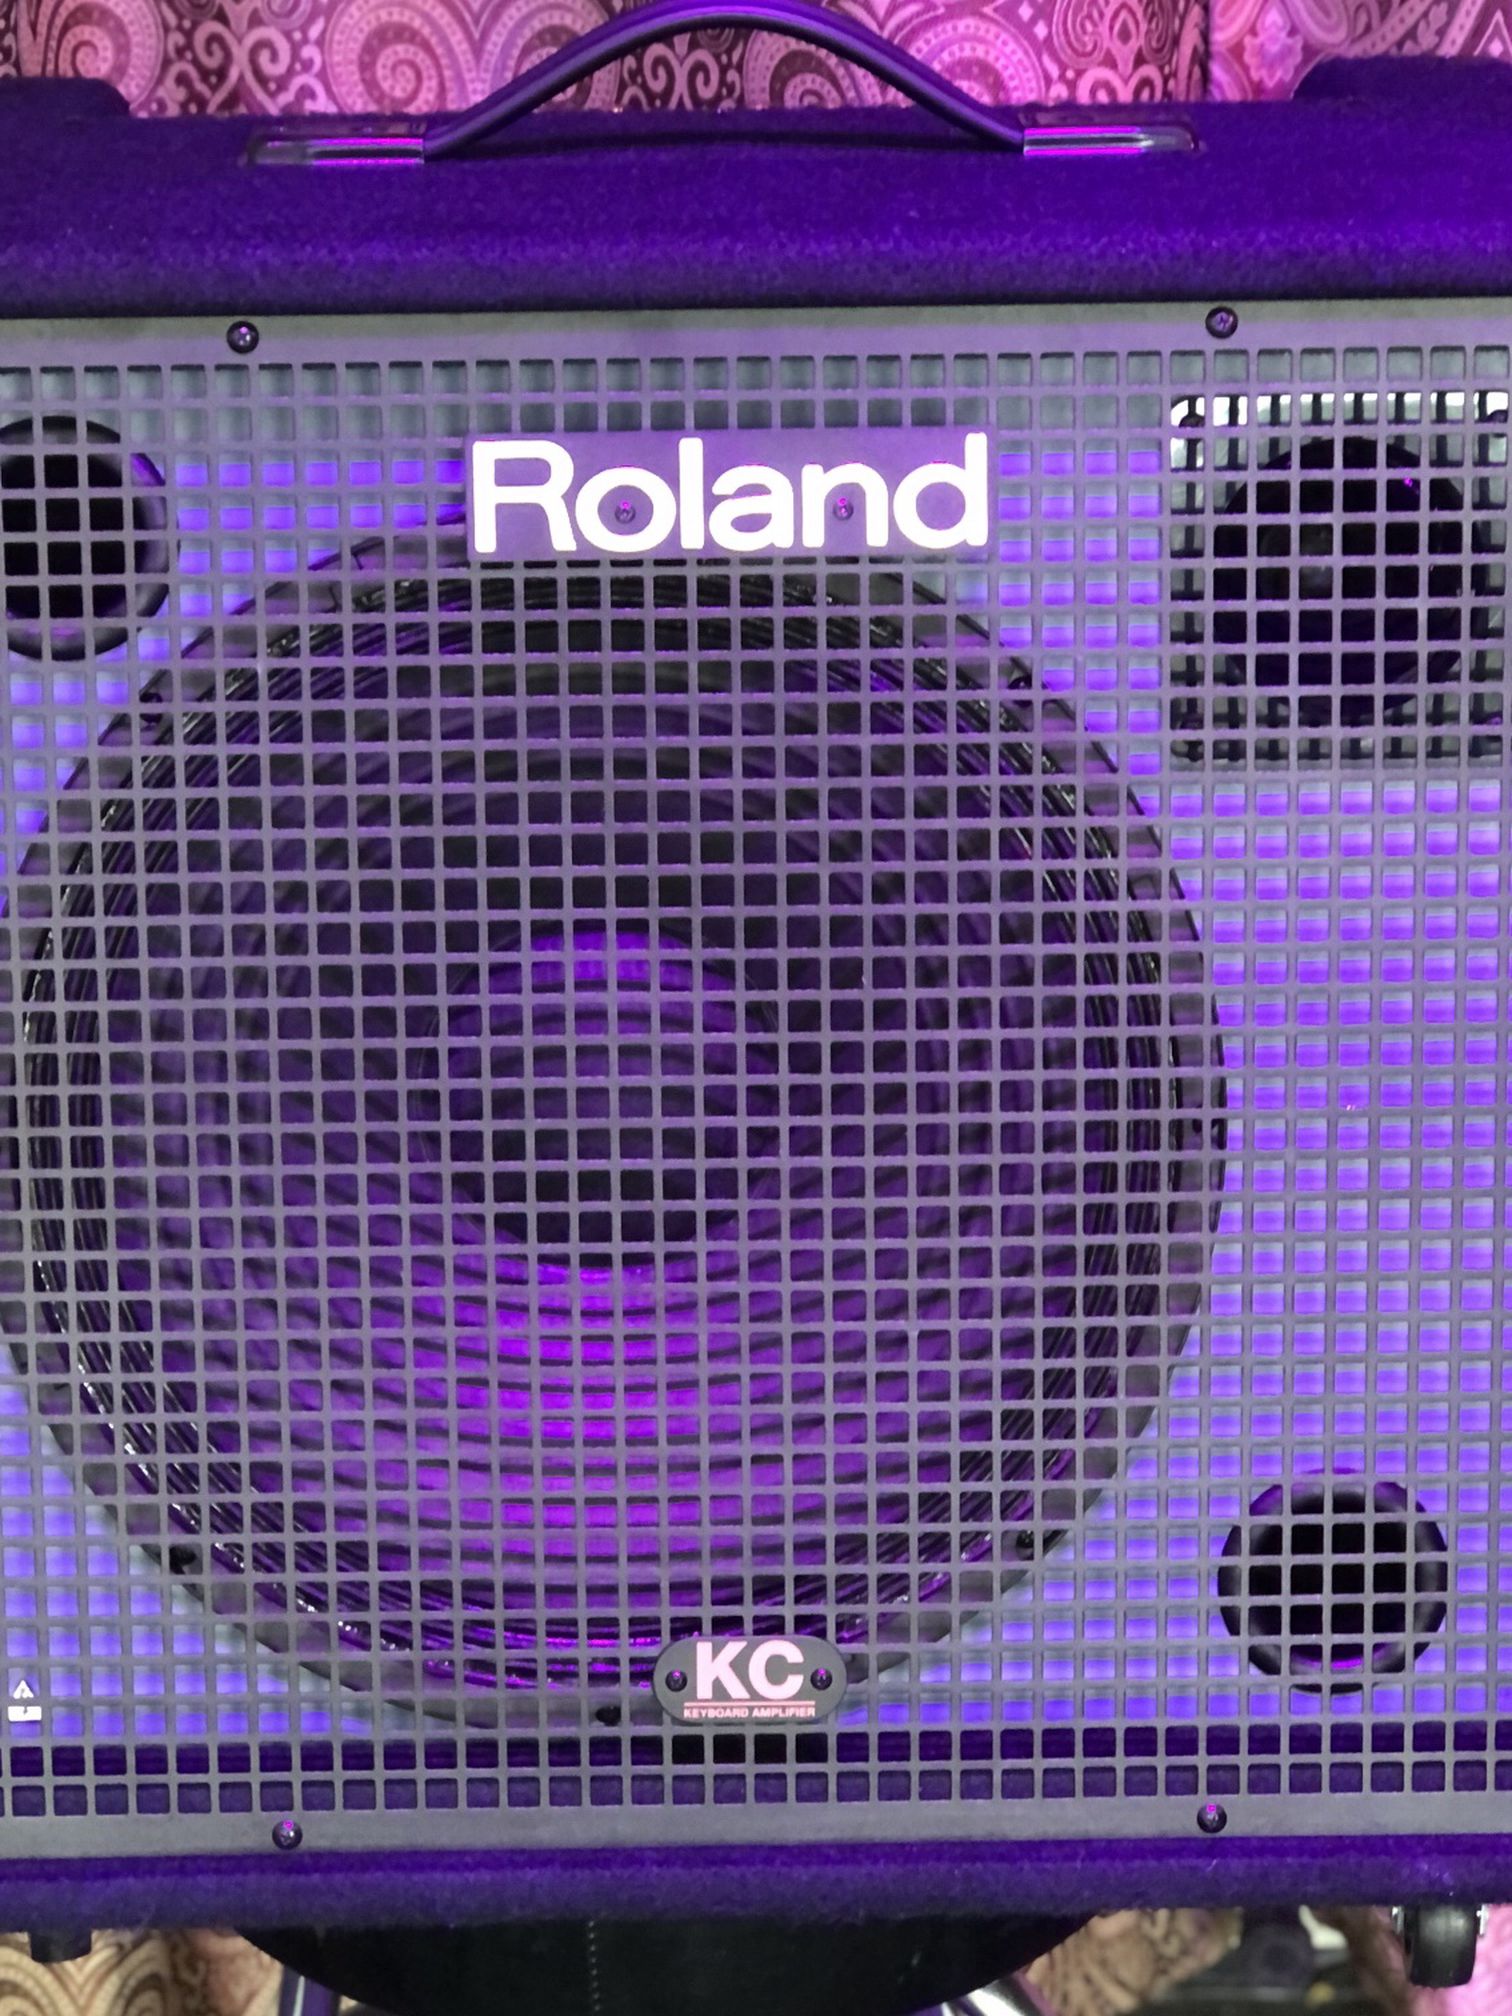 Roland KC-550 Overview The Roland KC-550 is a keyboard amplifier with a 4-Channel Stereo mixer and 180 Watts of power, built into a 2-way, full-range